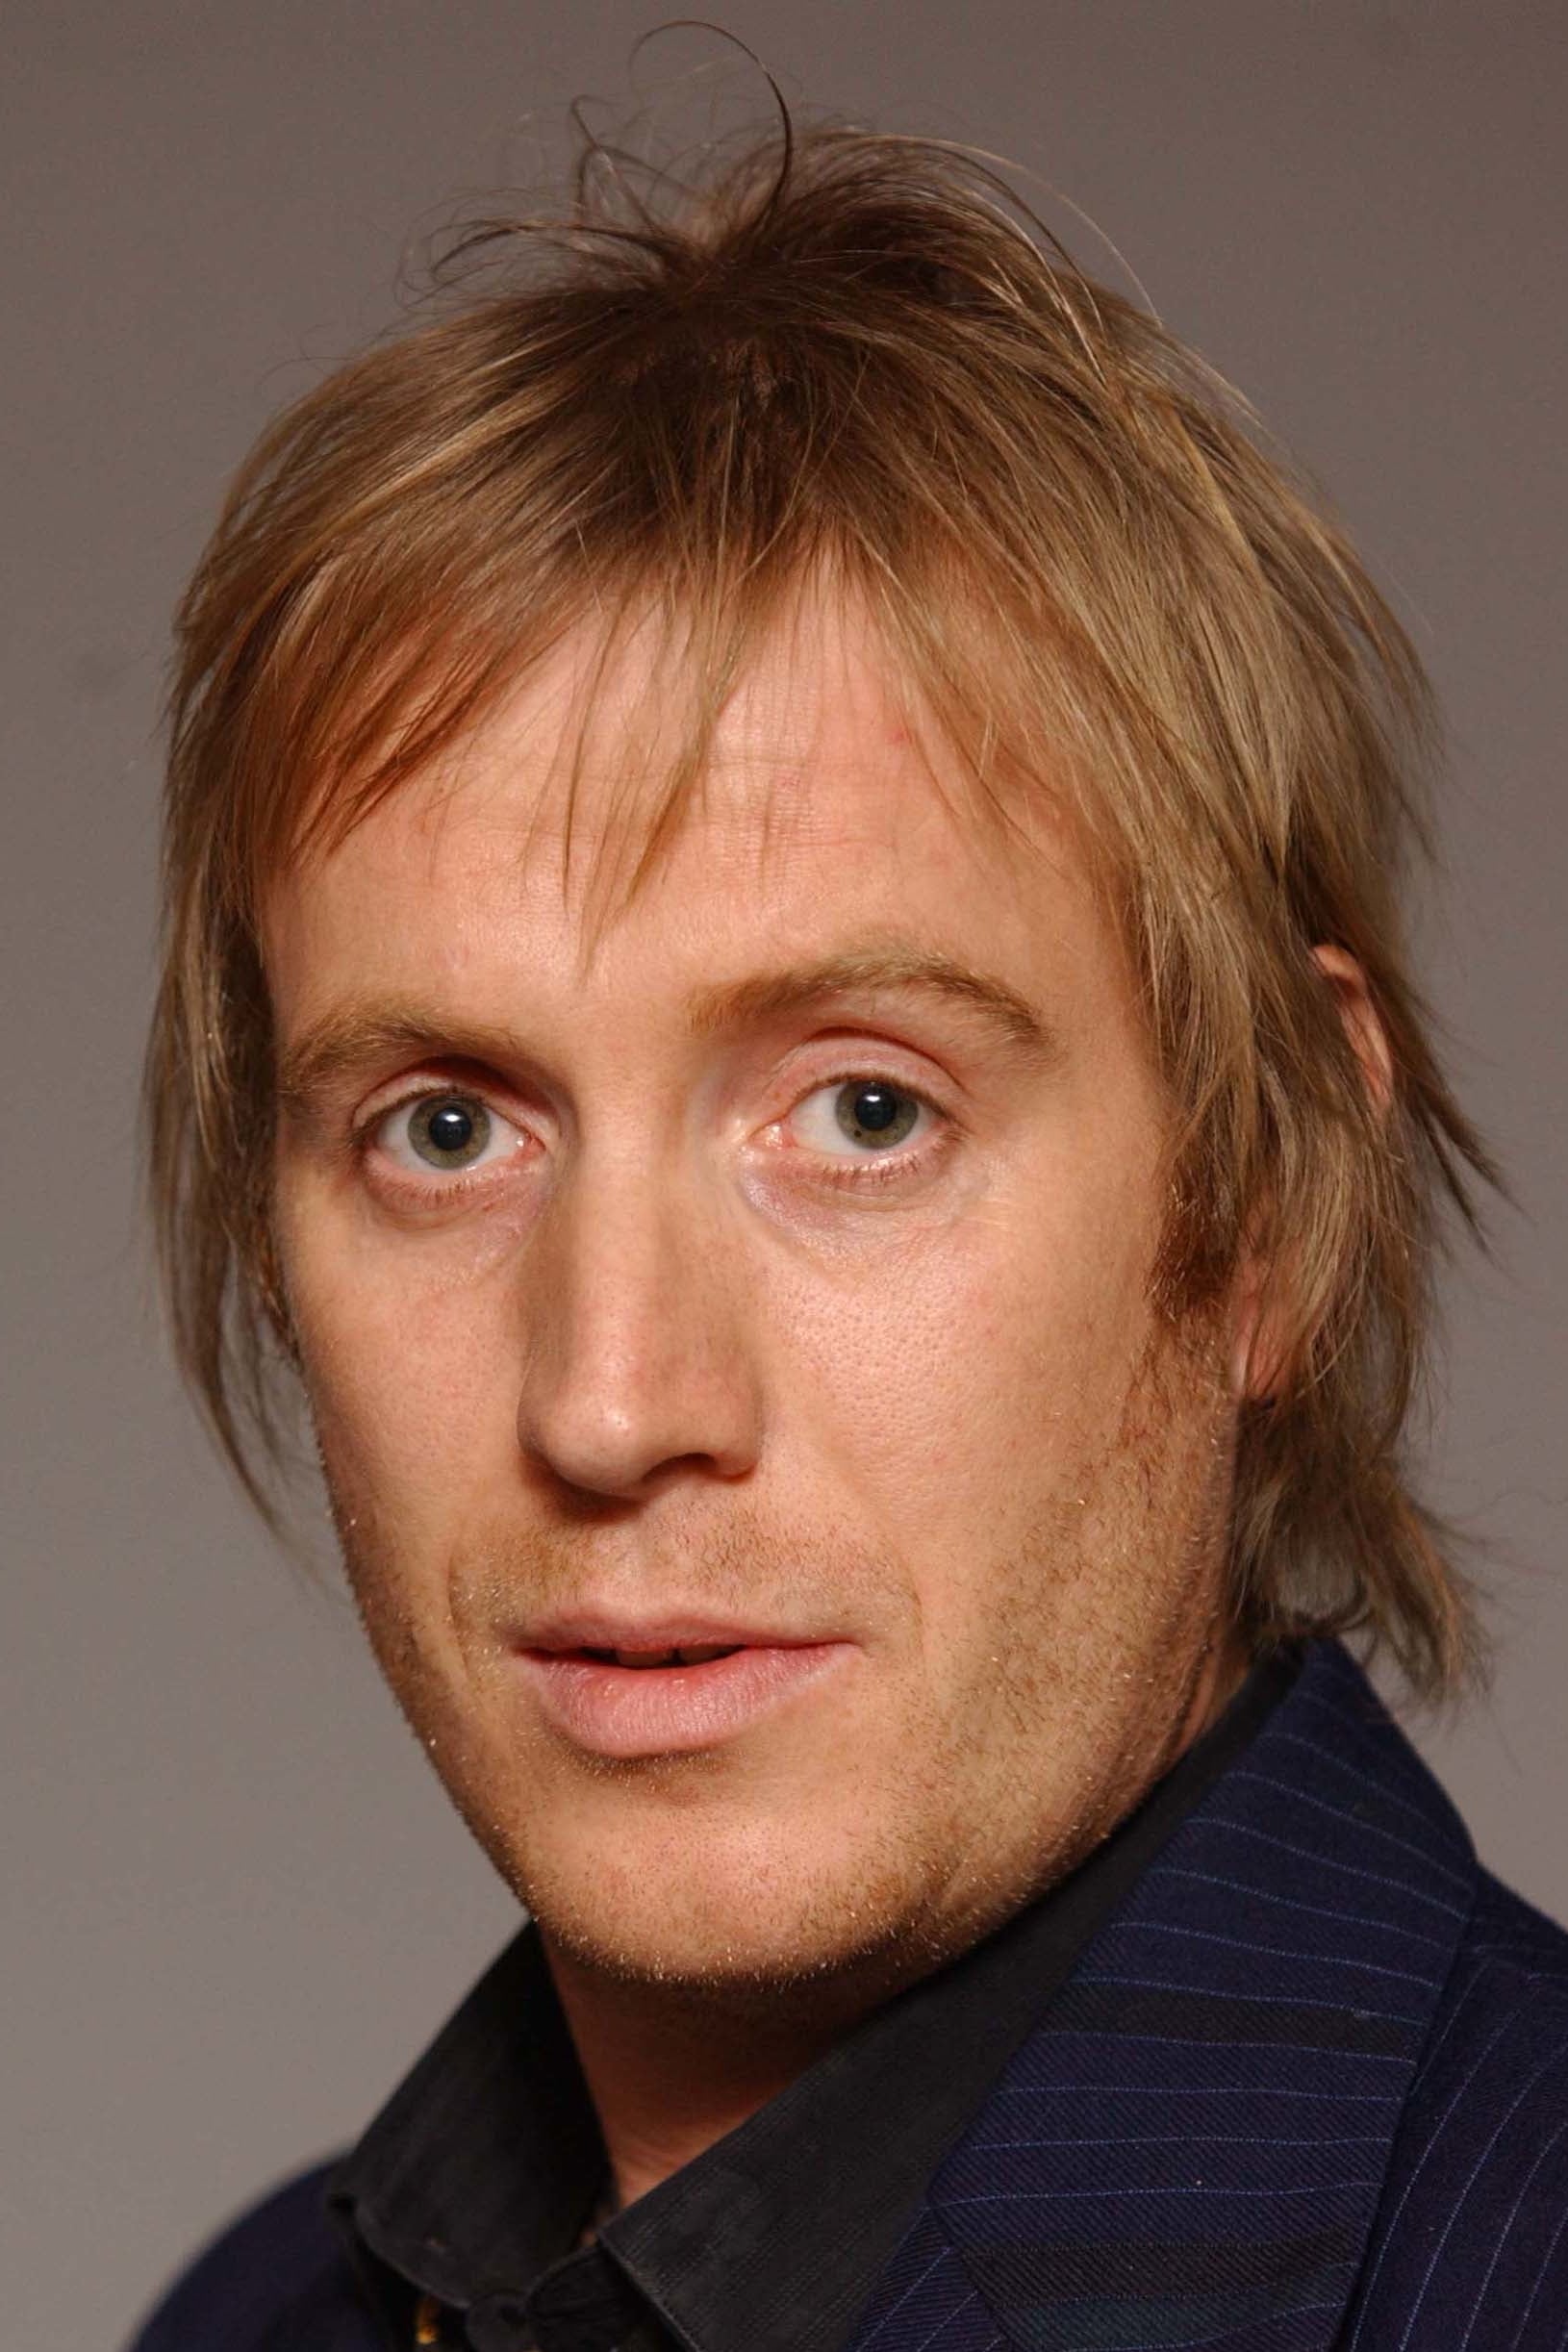 Rhys Ifans image